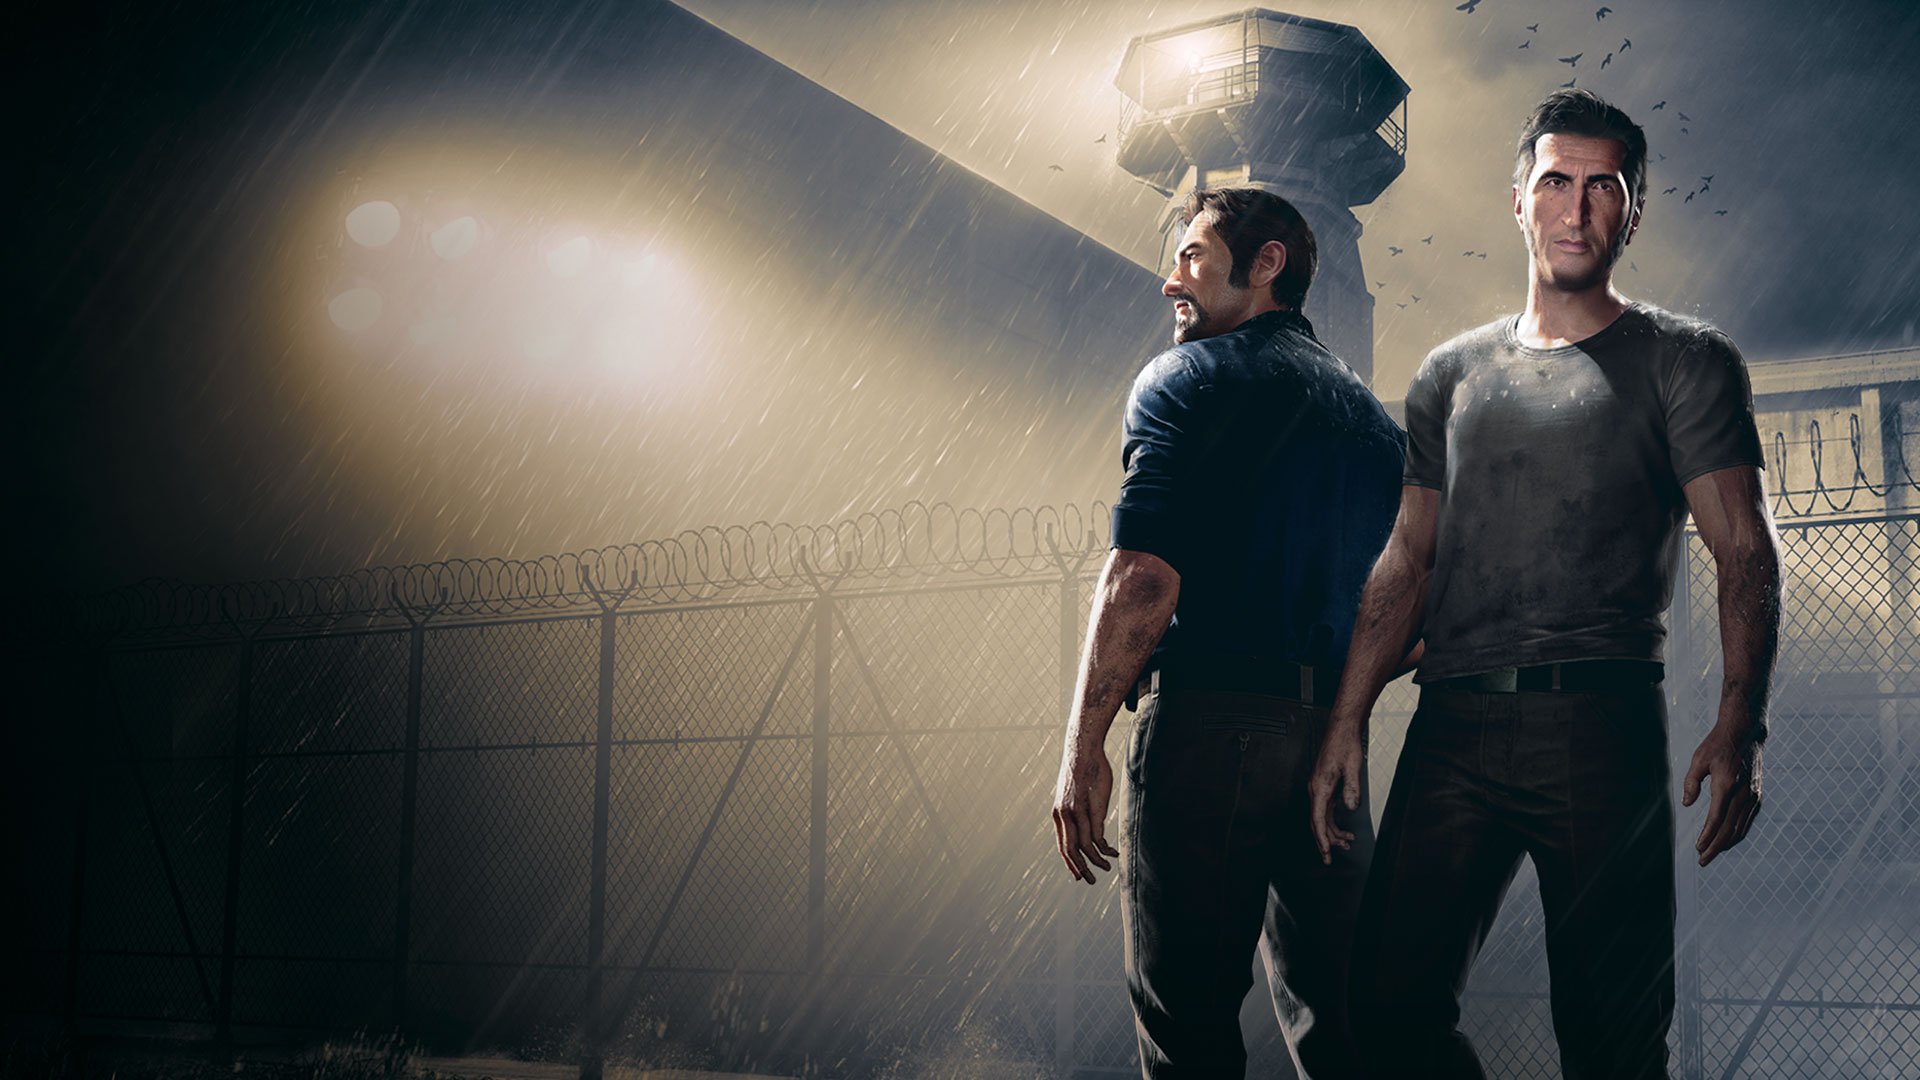 A way out джойстик